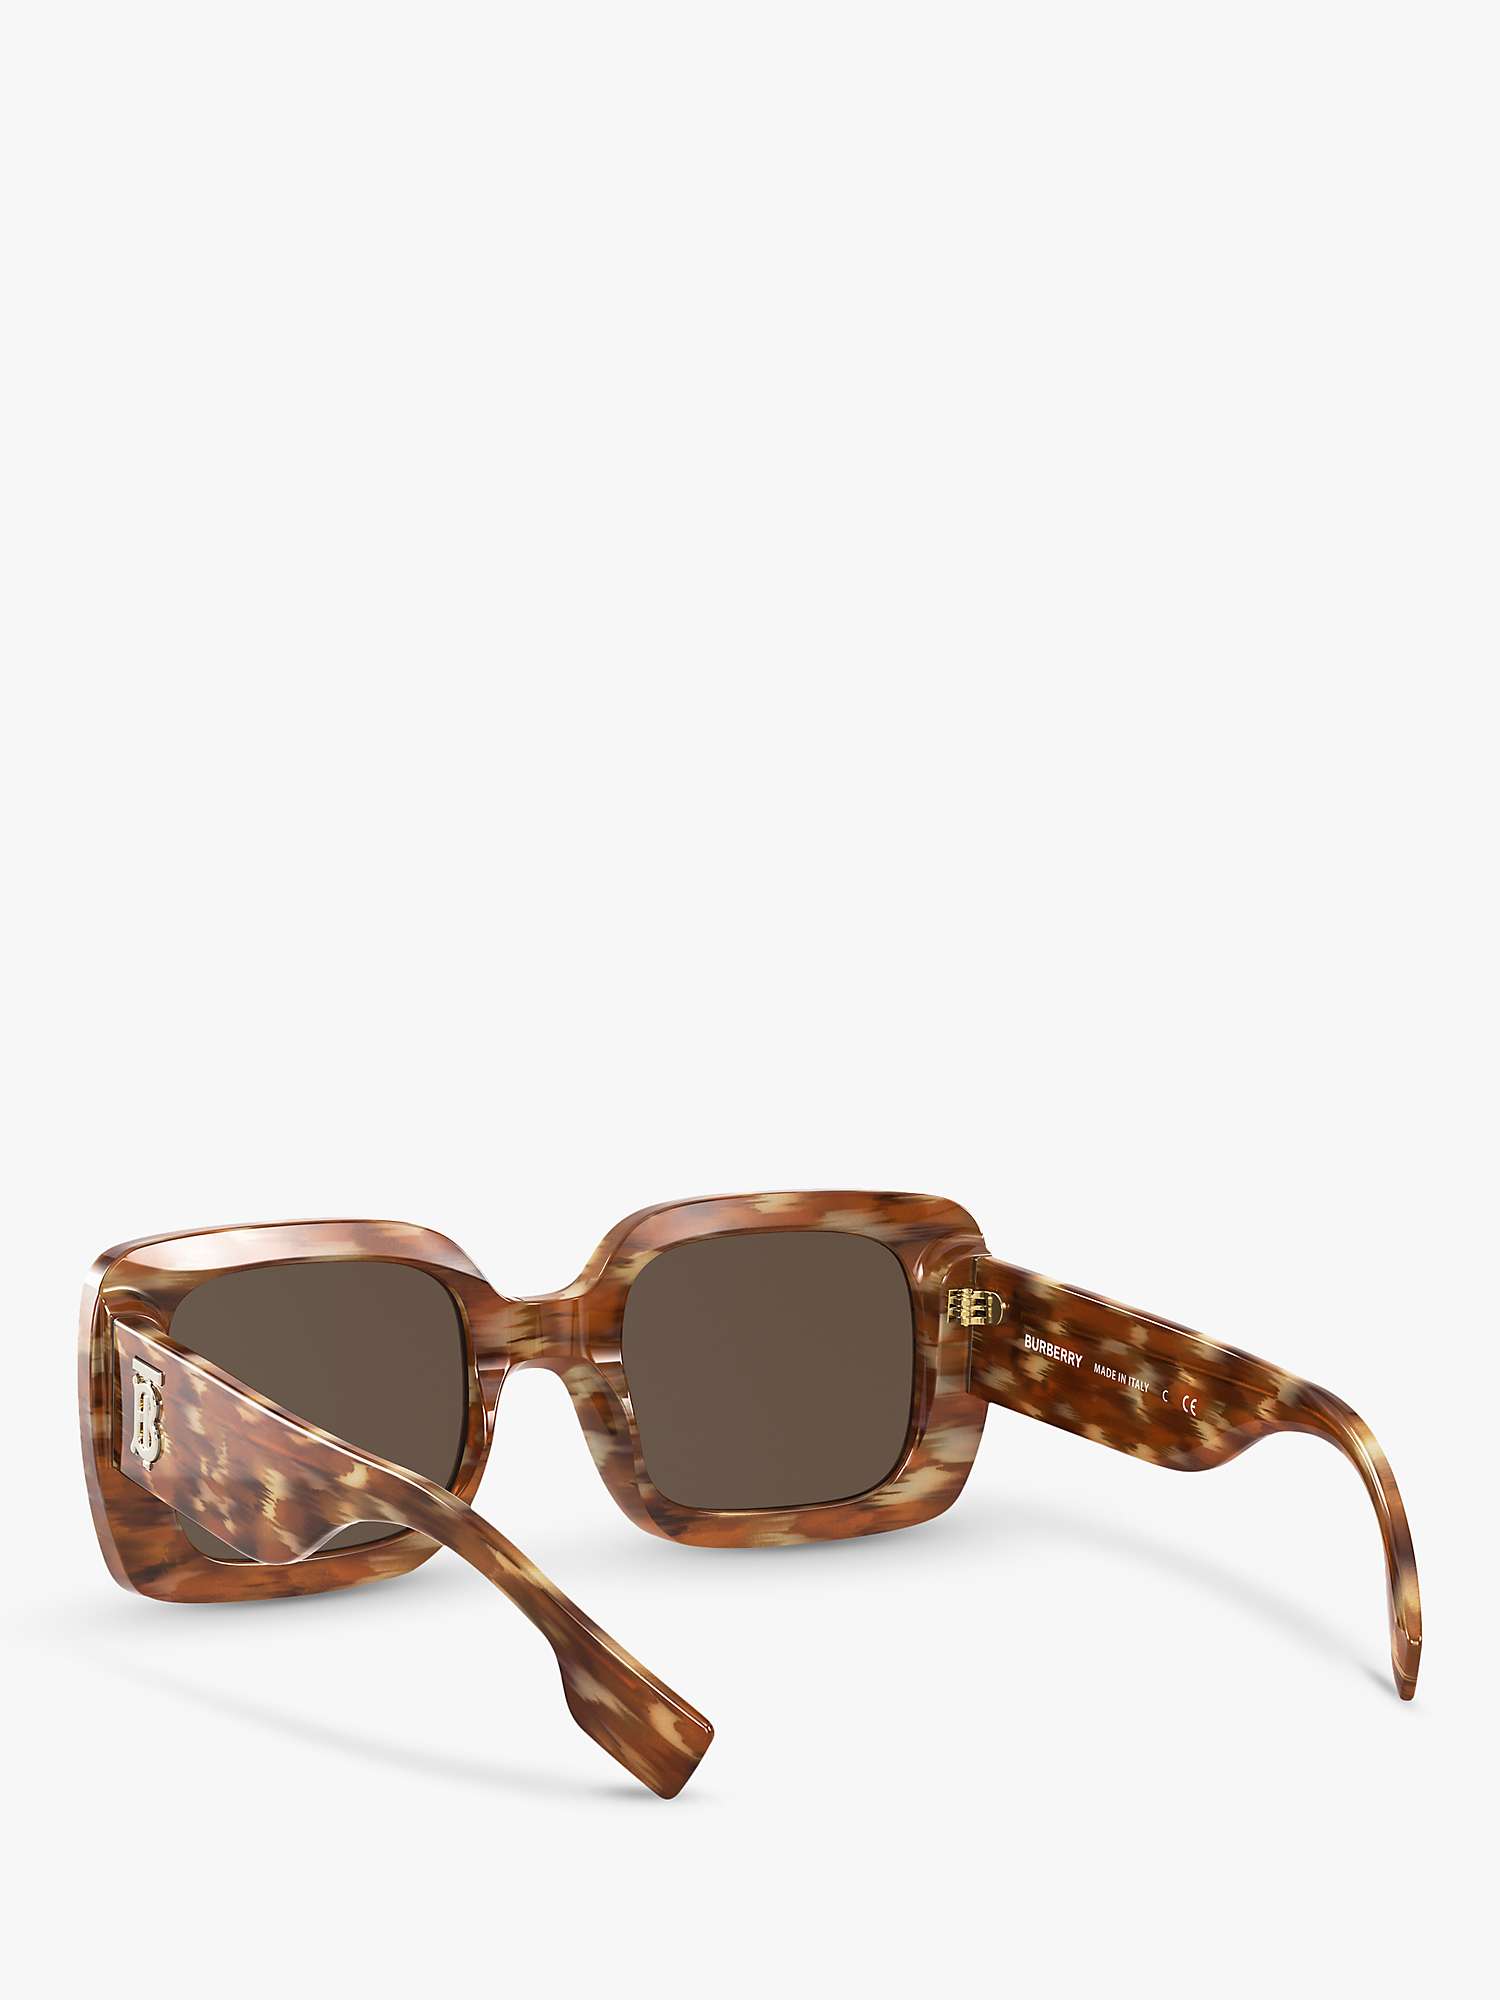 Buy Burberry BE4327 Women's Square Sunglasses, Brown Online at johnlewis.com